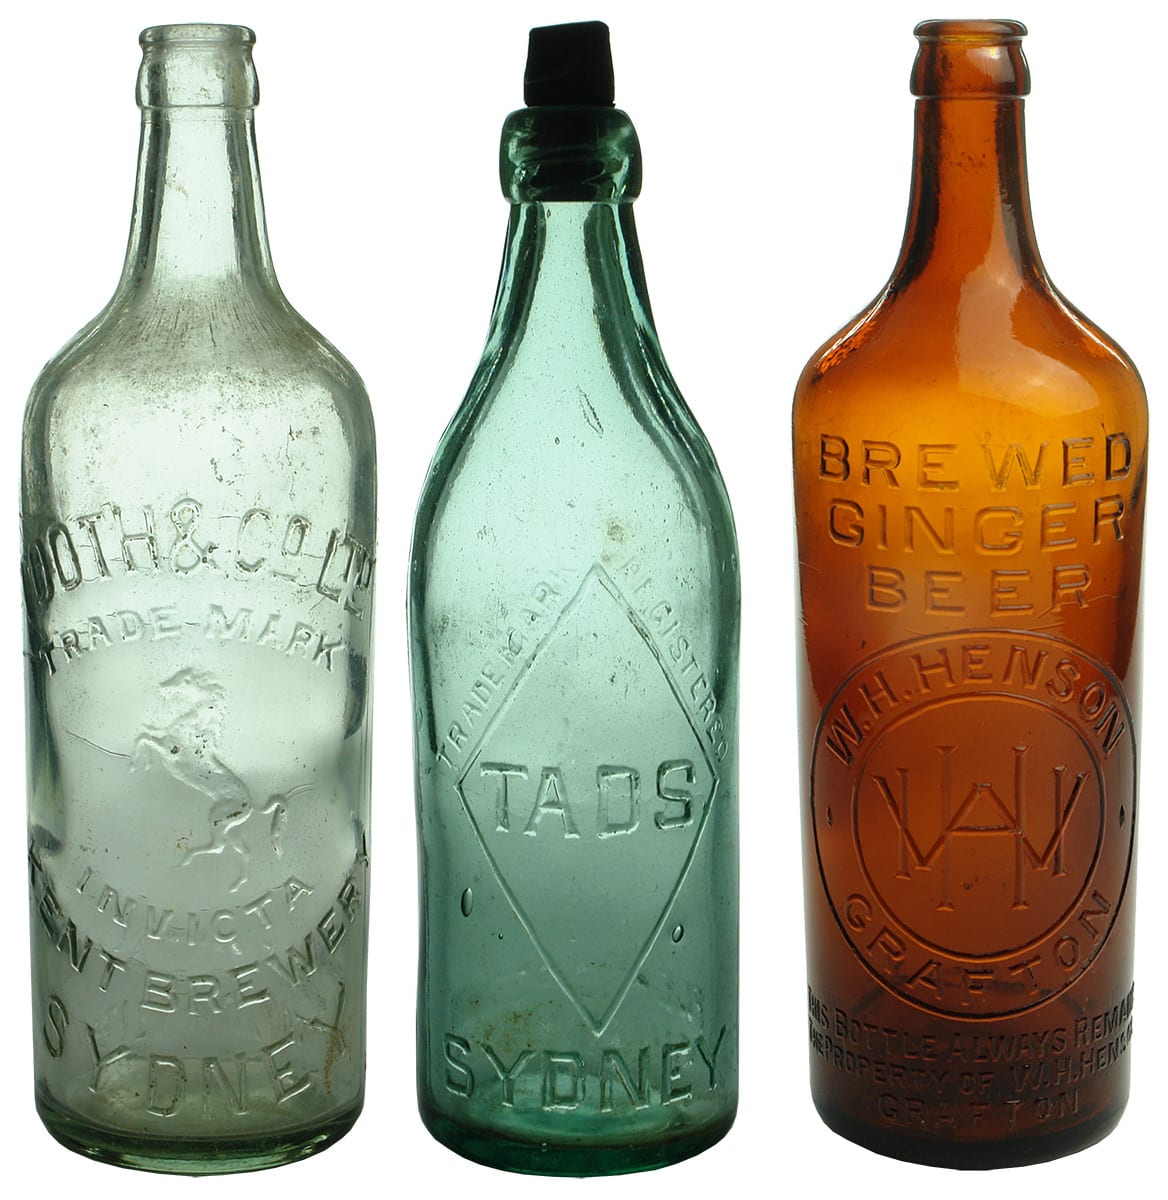 Collection Old Antique Bottles